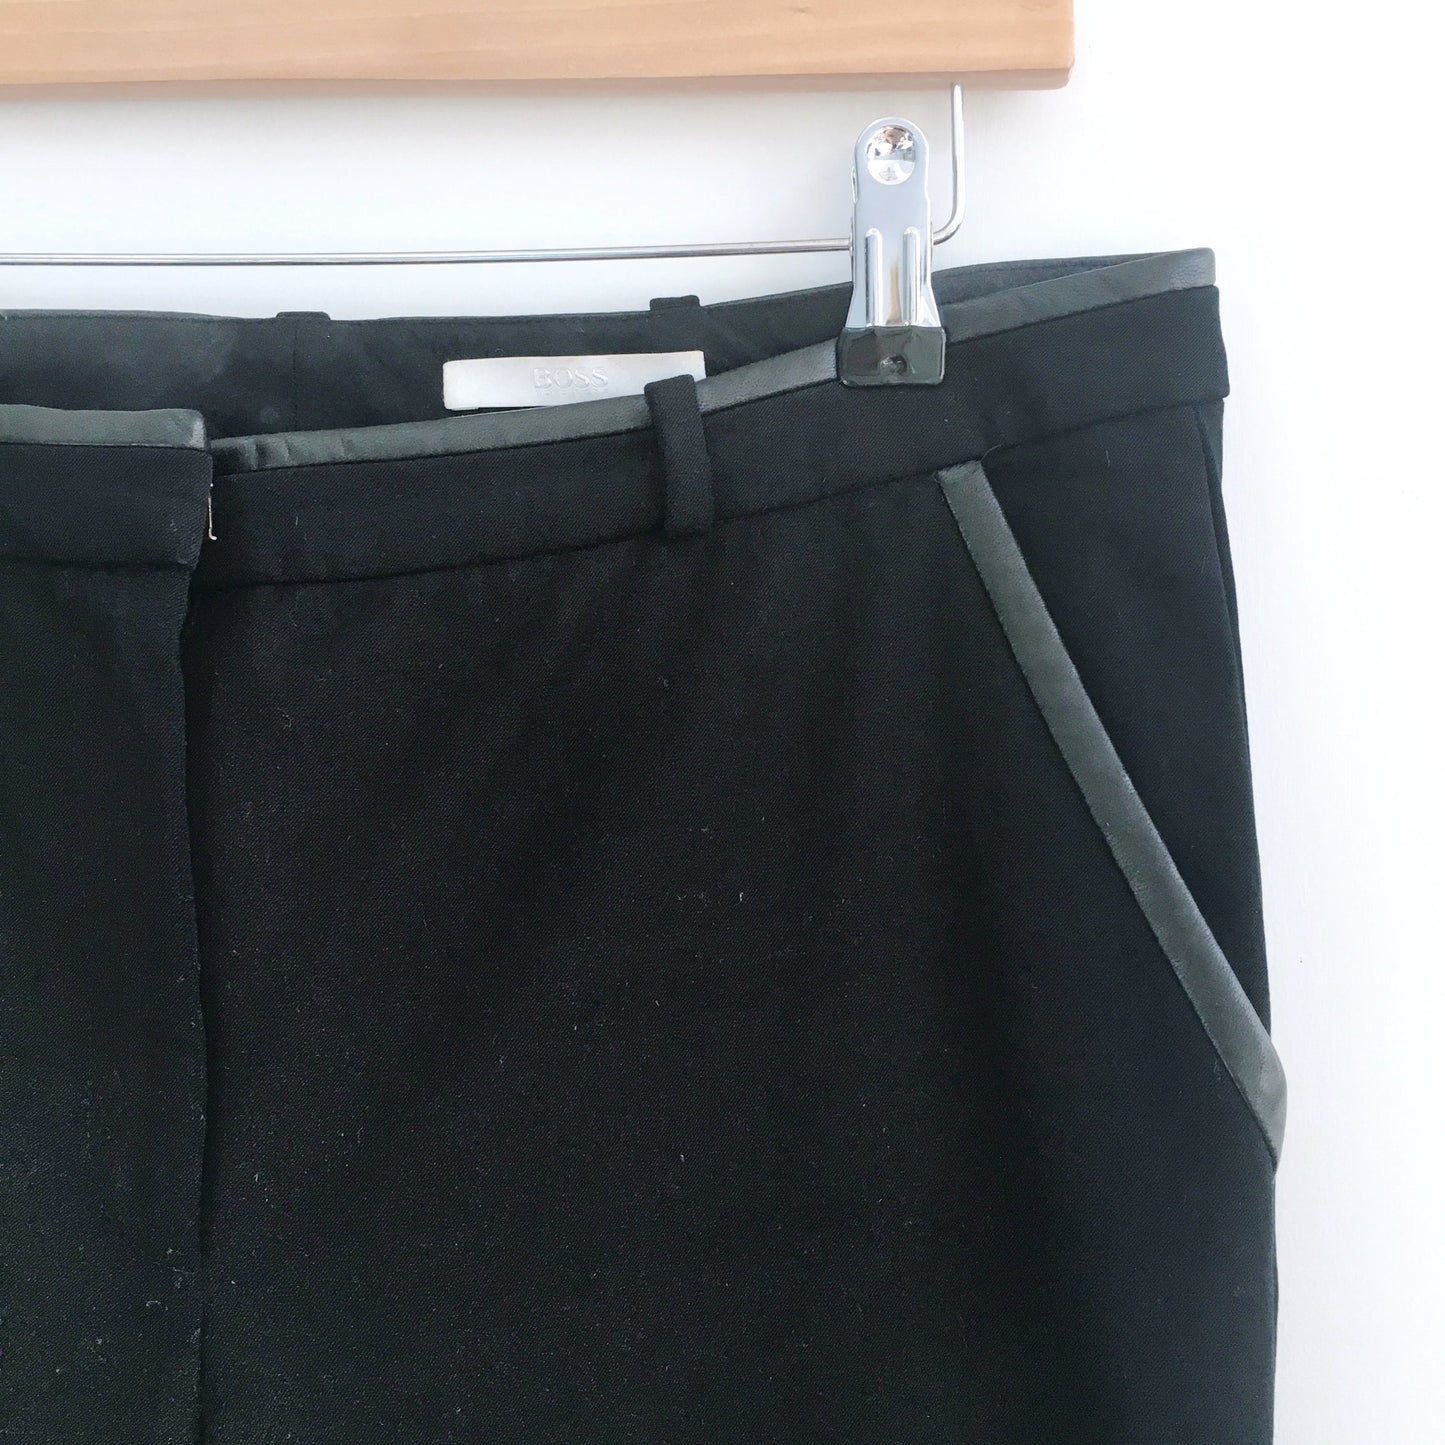 Hugo Boss Trouser with Leather Trim - size 6